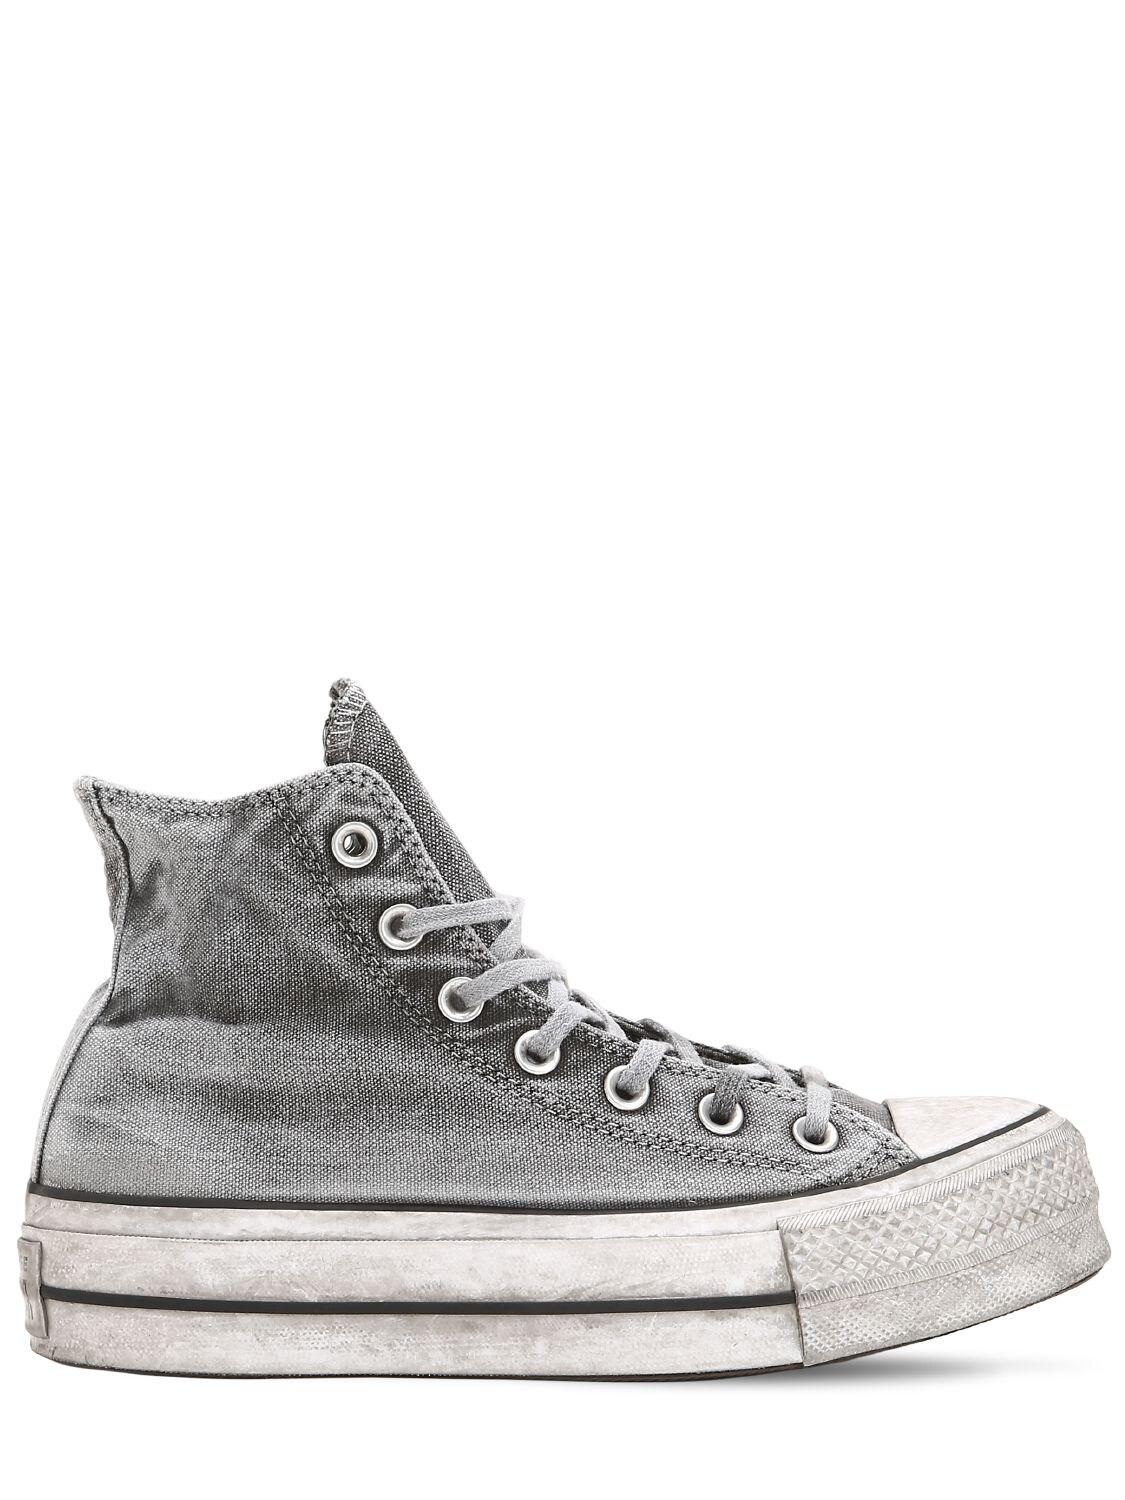 Converse Taylor High Lift Sneakers in Gray